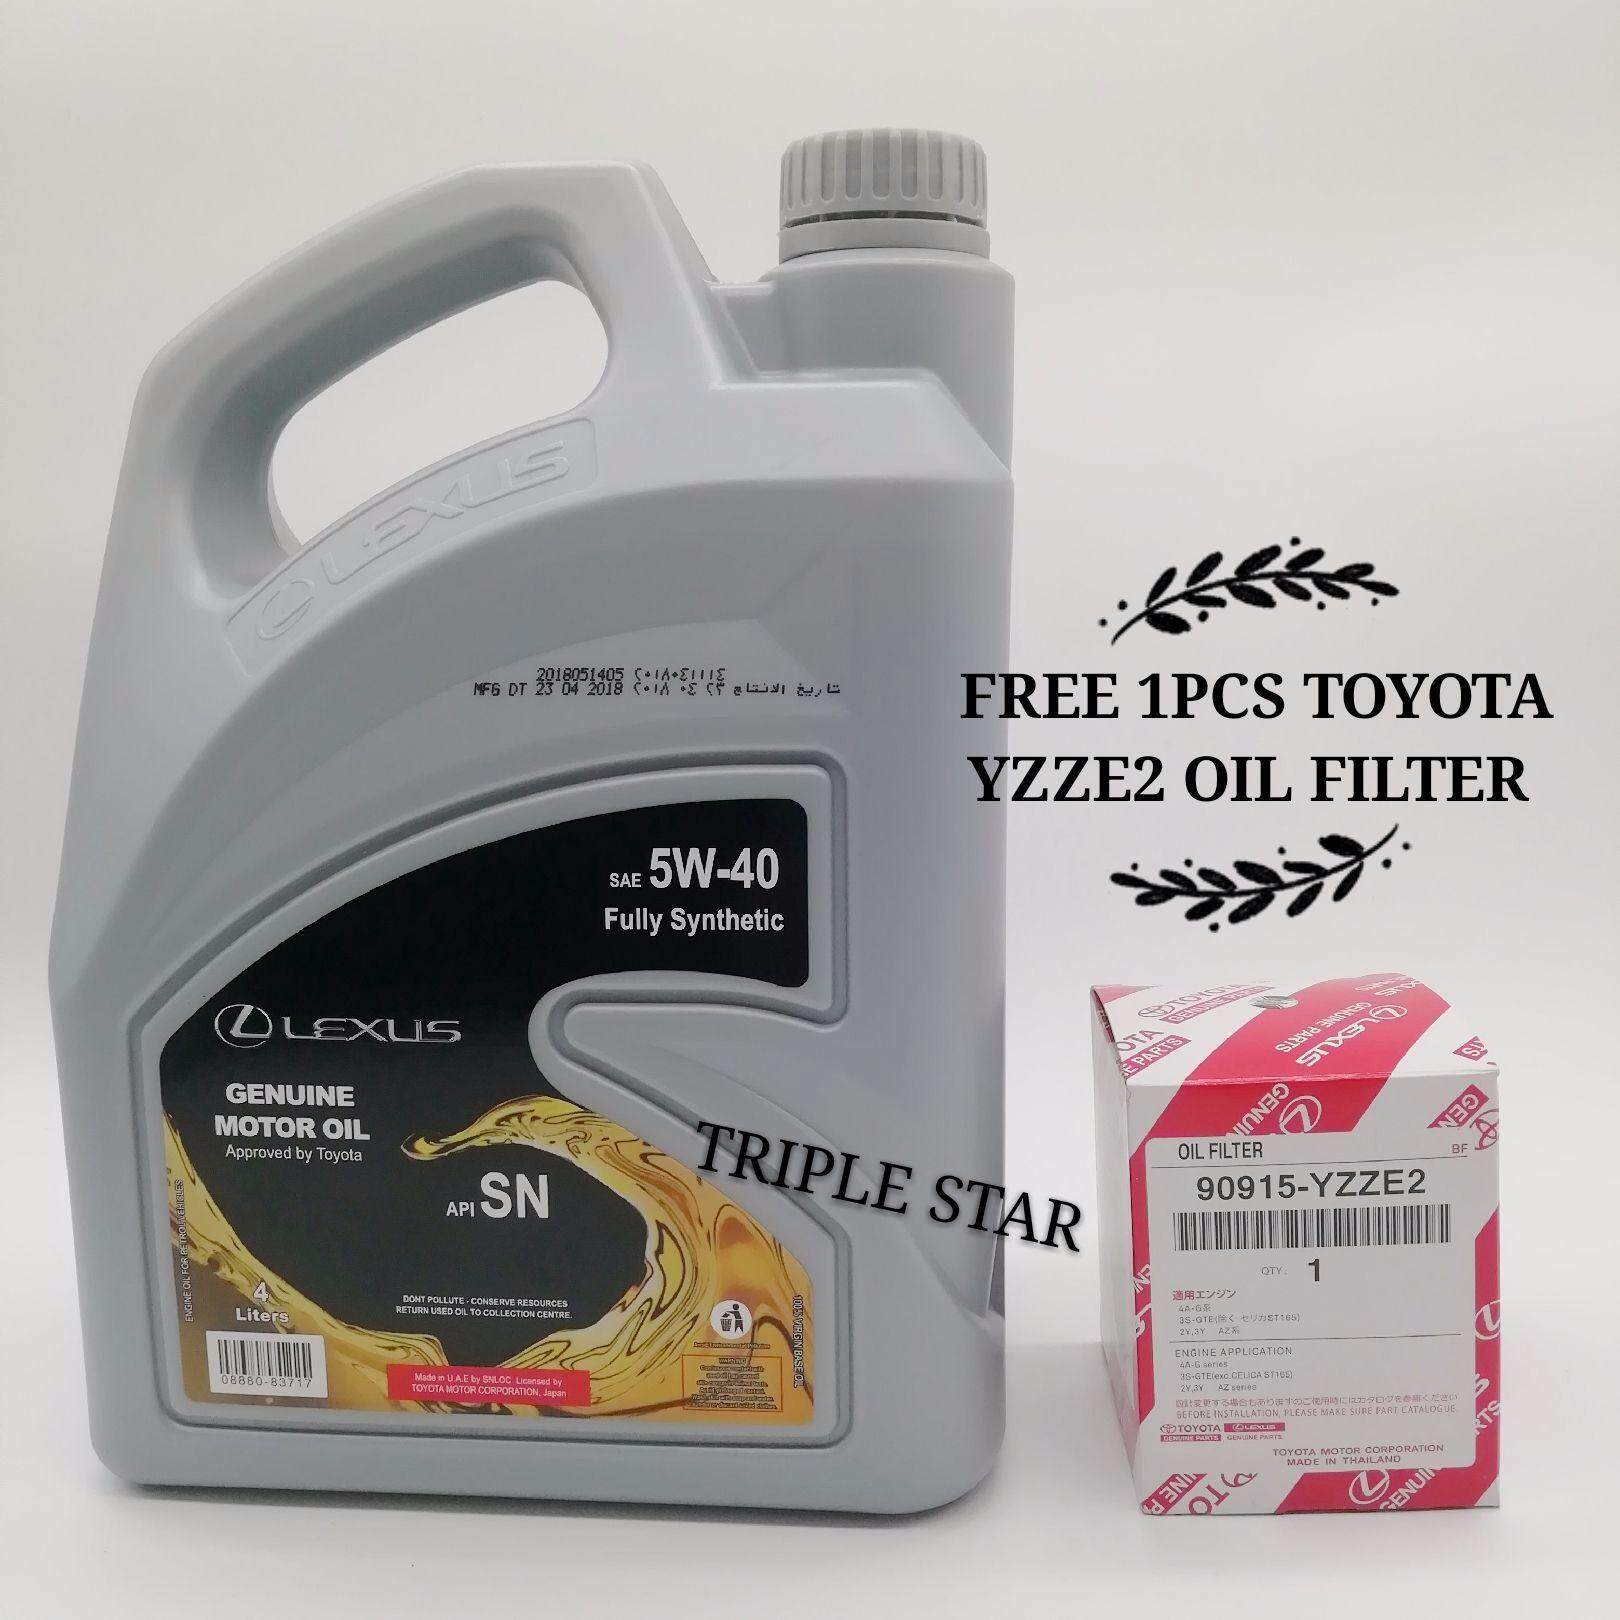 LEXUS FULLY SYNTHETIC 5W40 ENGINE OIL With Toyota Oil Filter YZZE2